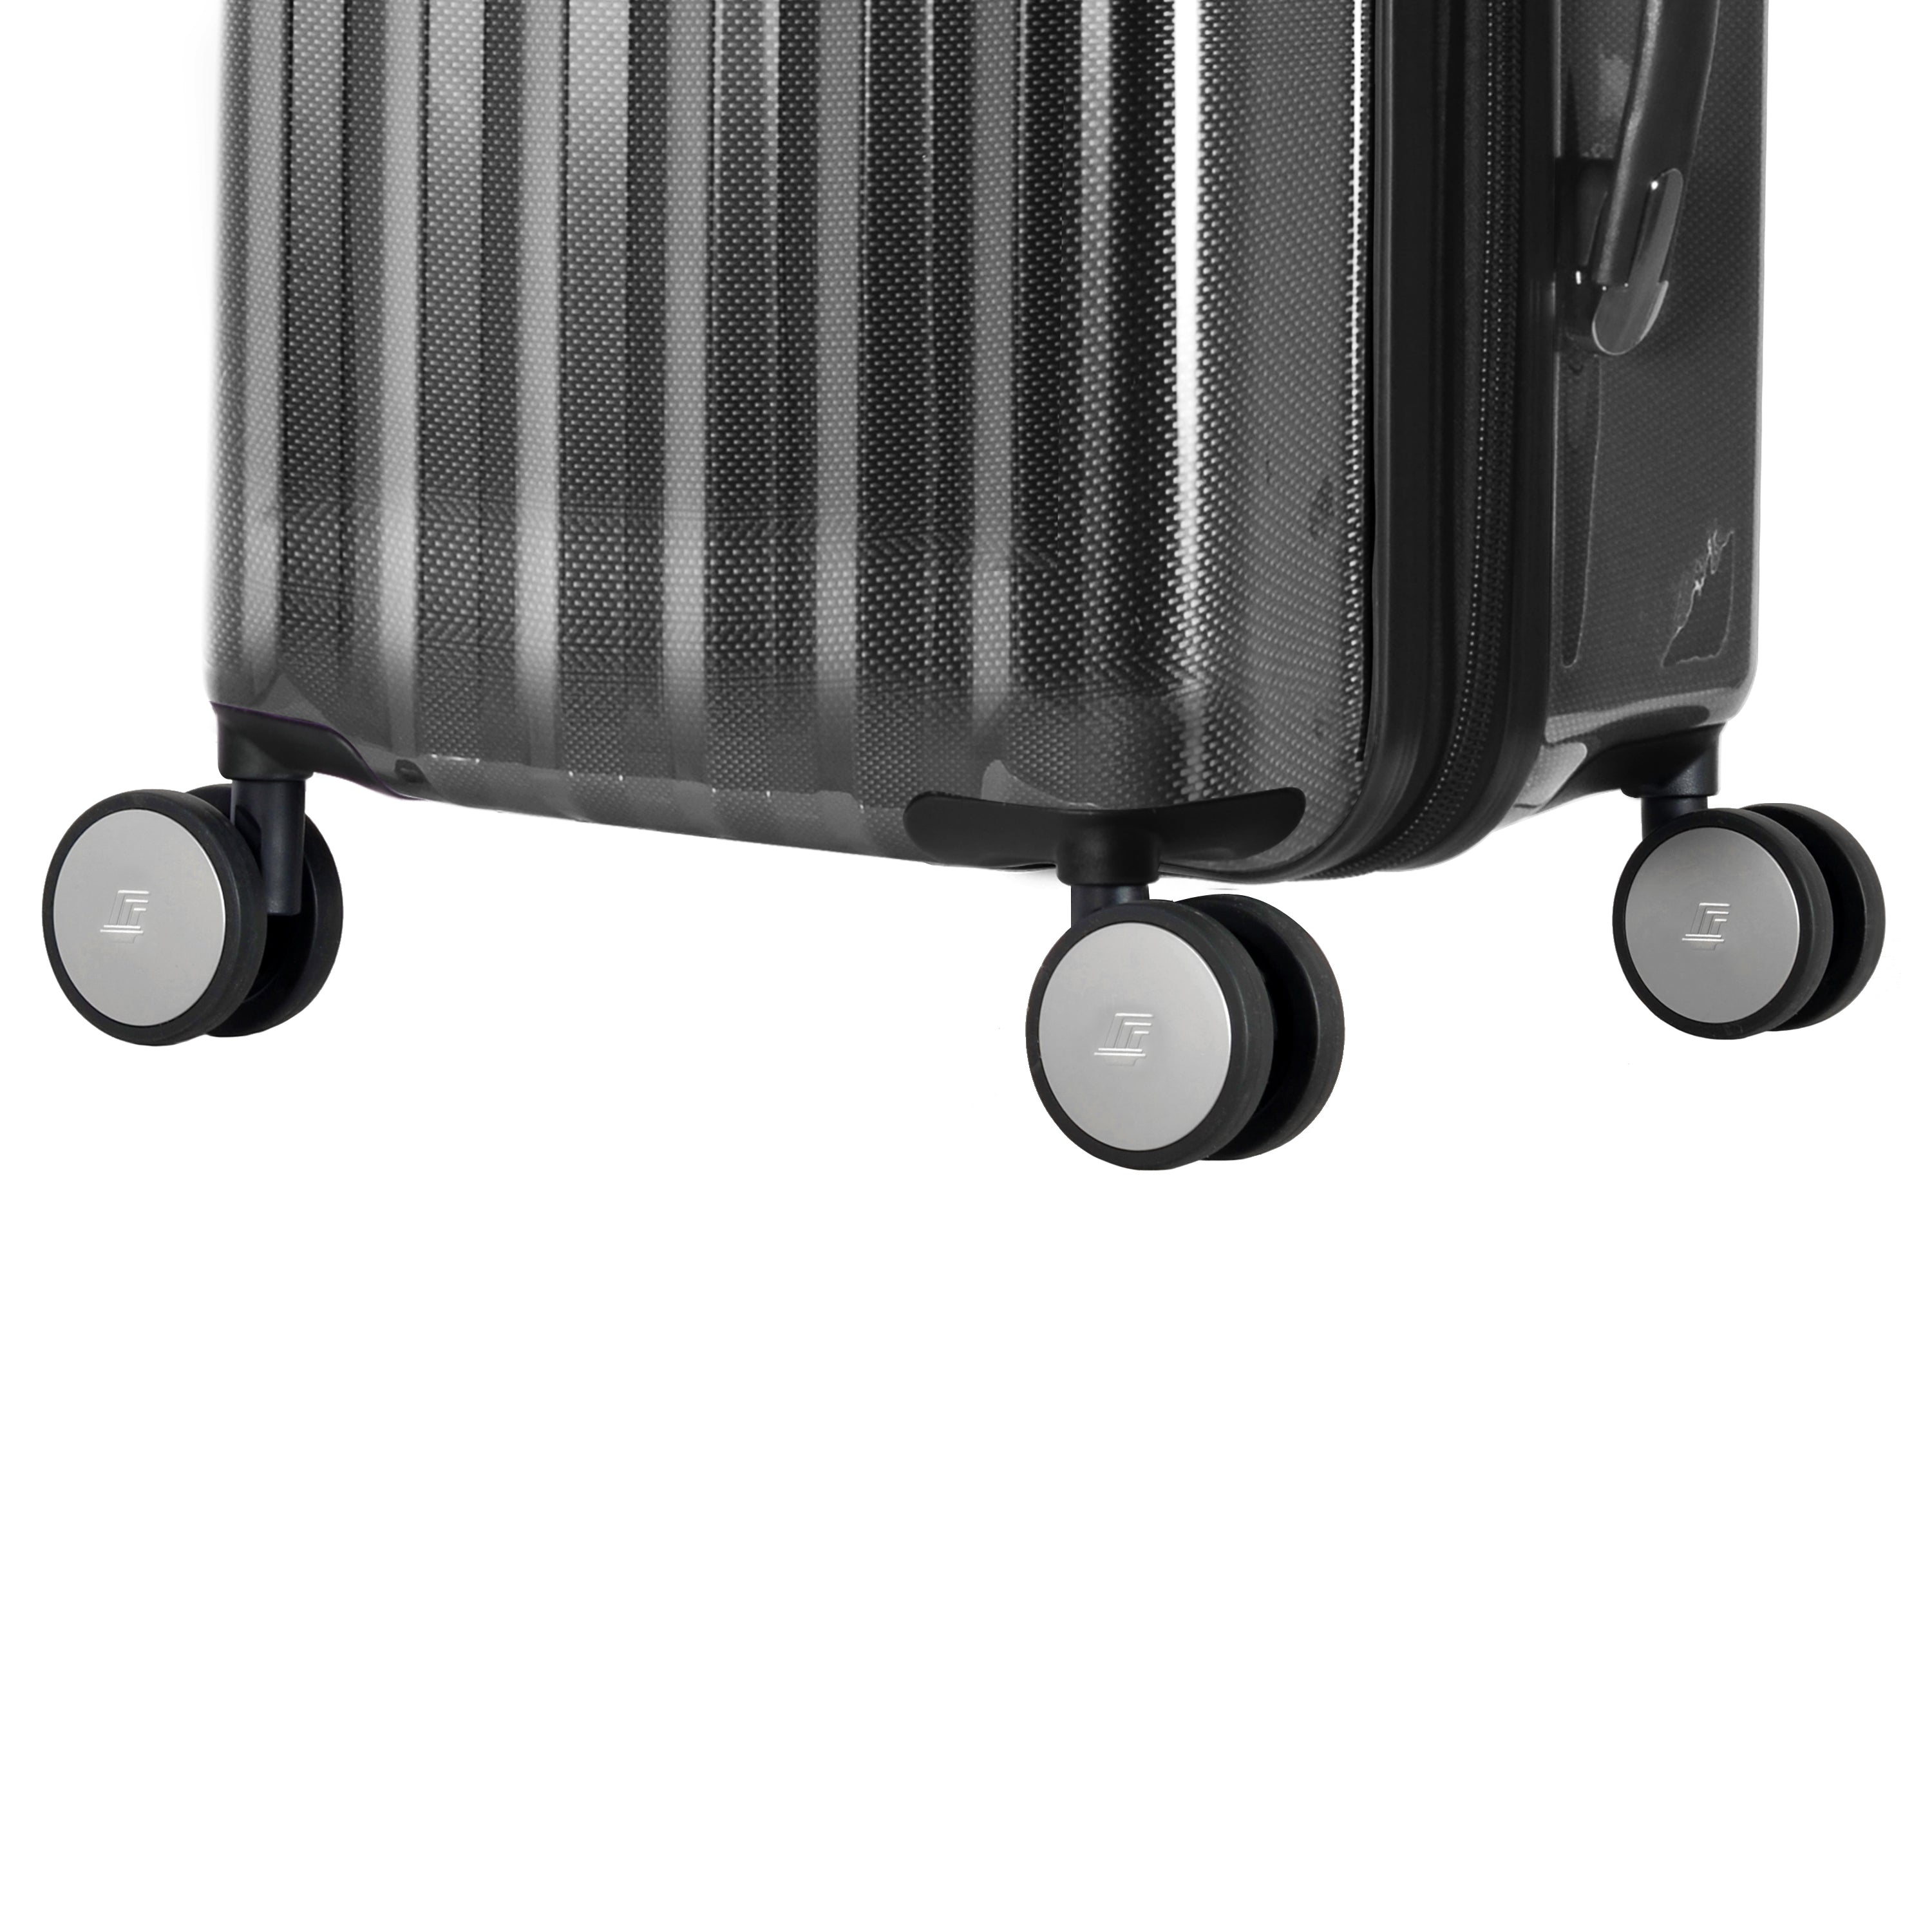 Titan 21"  Lightweight yet Sturdy Polycarbonate Carry-On